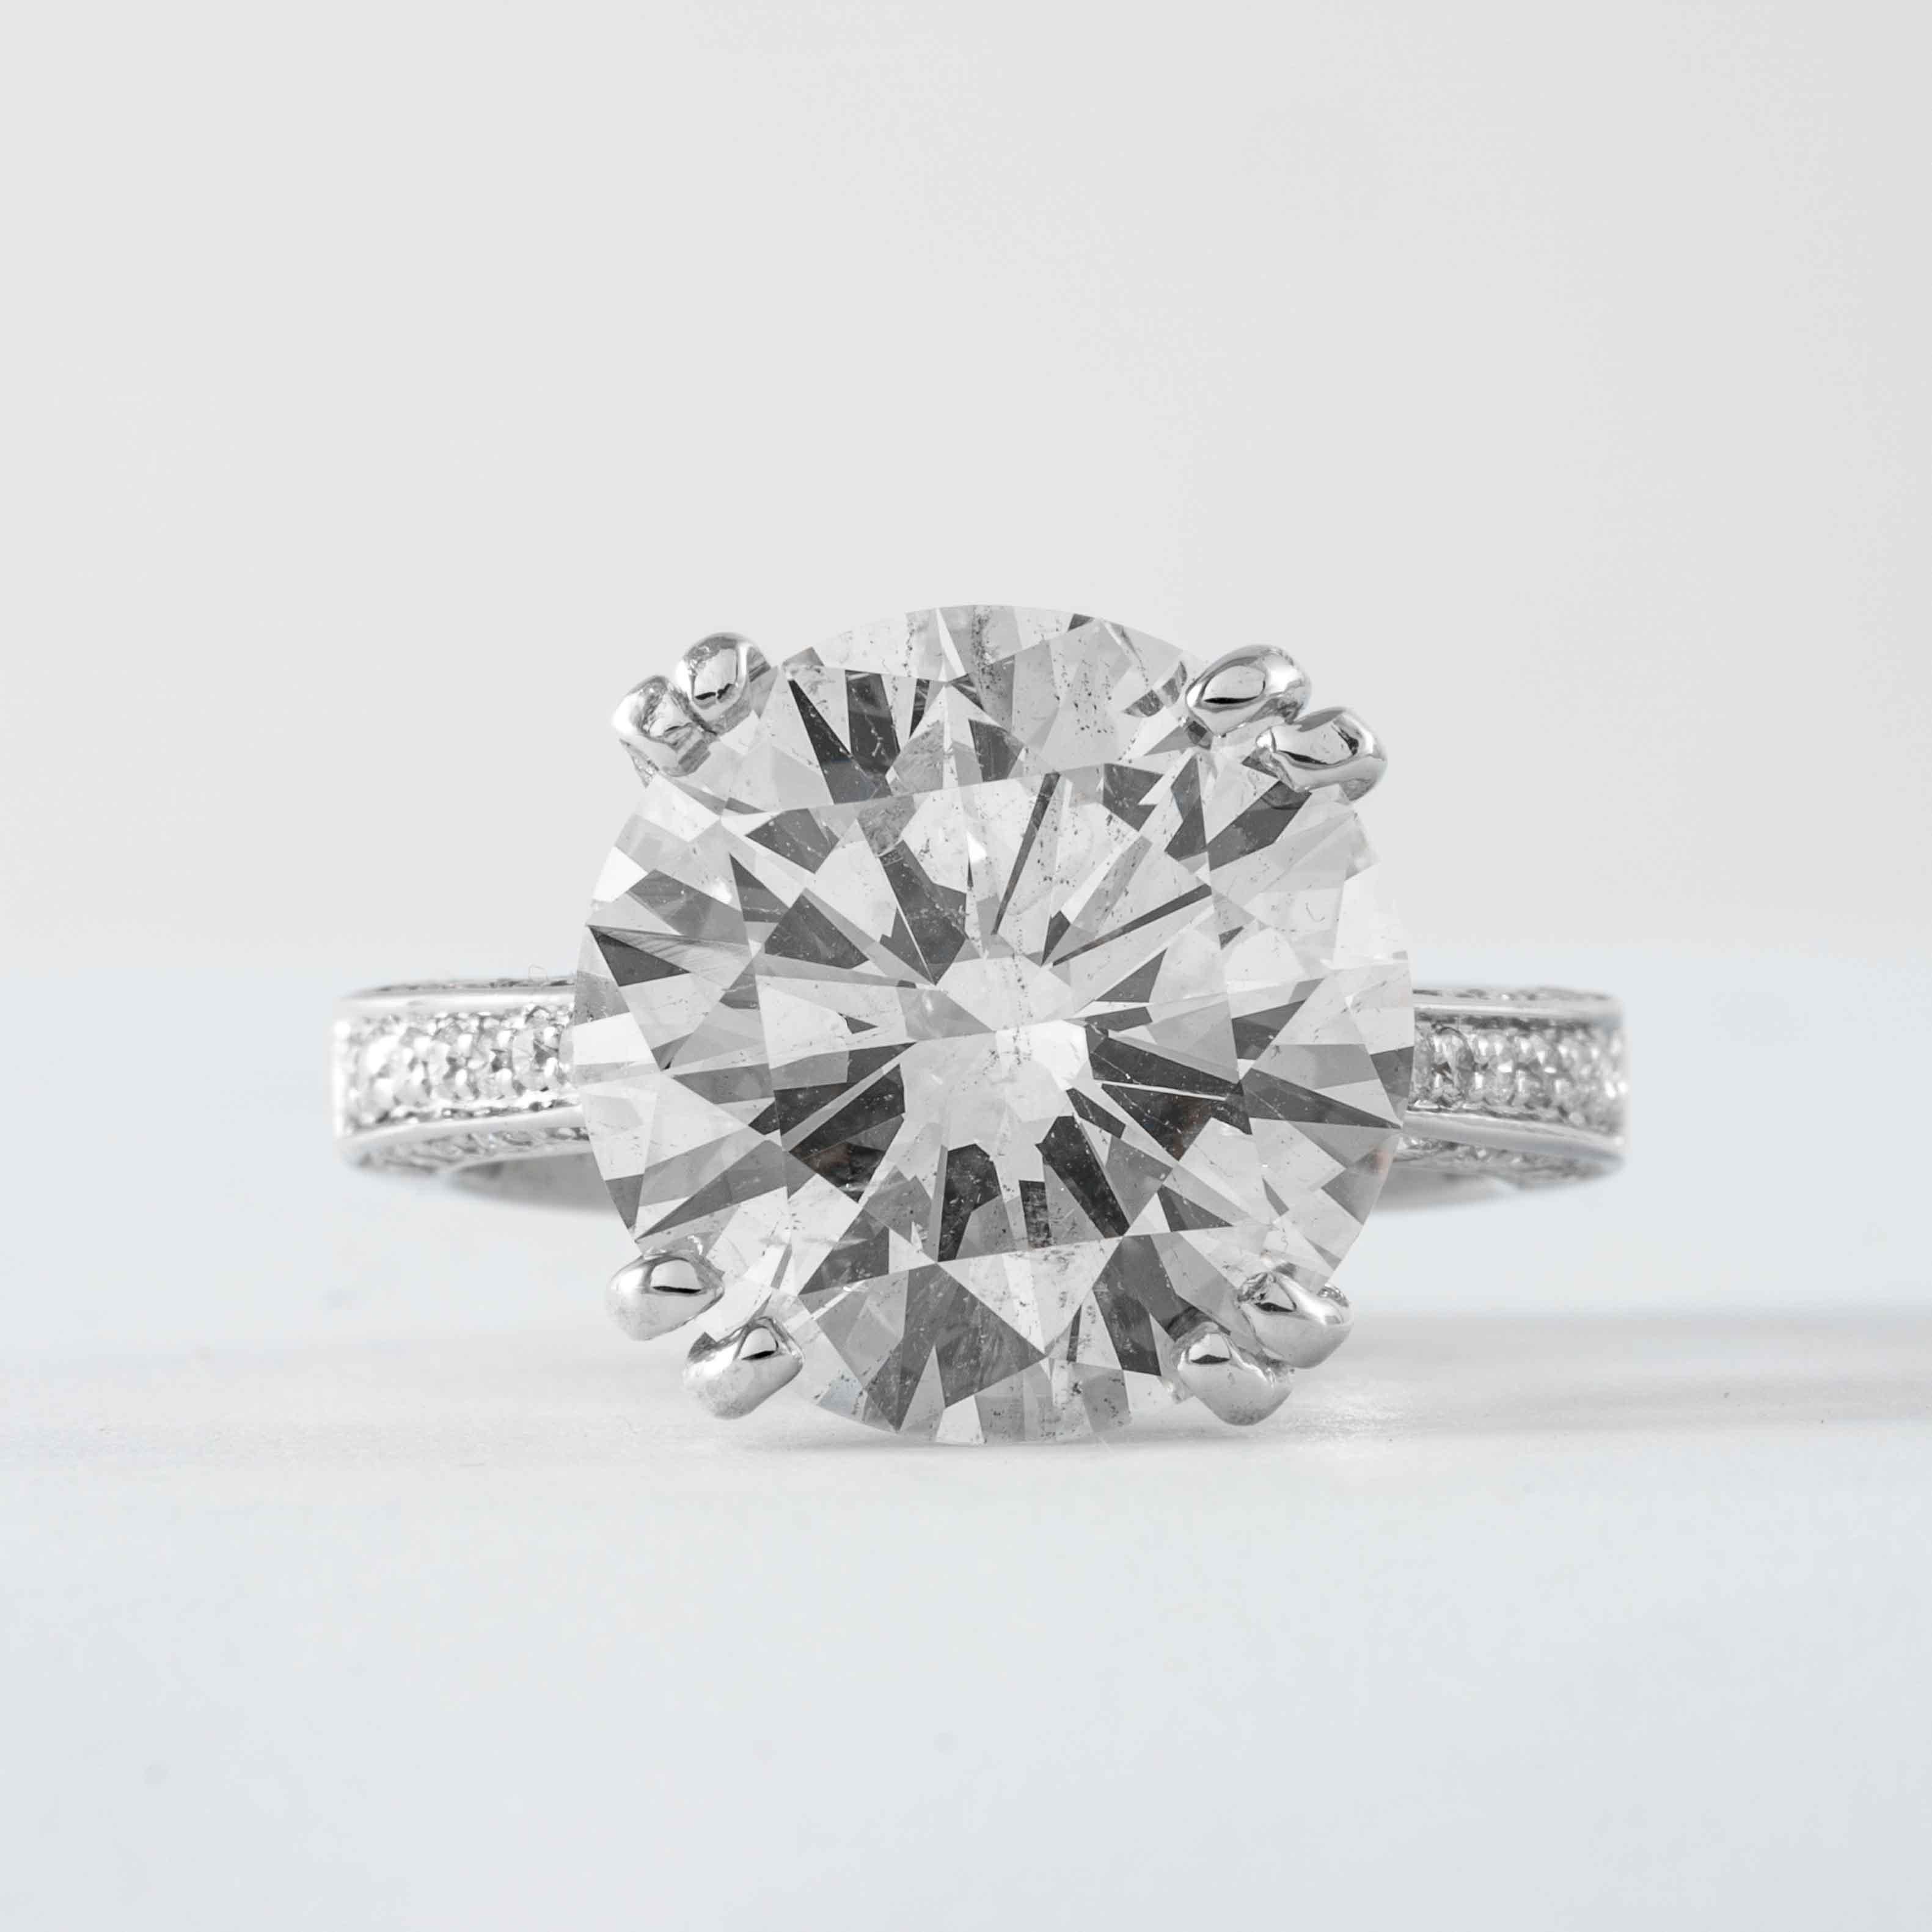 This platinum solitaire ring features 1 round brilliant cut diamond, weighing 8.30 carats with a respective color and clarity of J-K SI1-SI2. The diamond is set in a custom Shreve, Crump & Low classic 4-prong platinum ring with accenting diamond